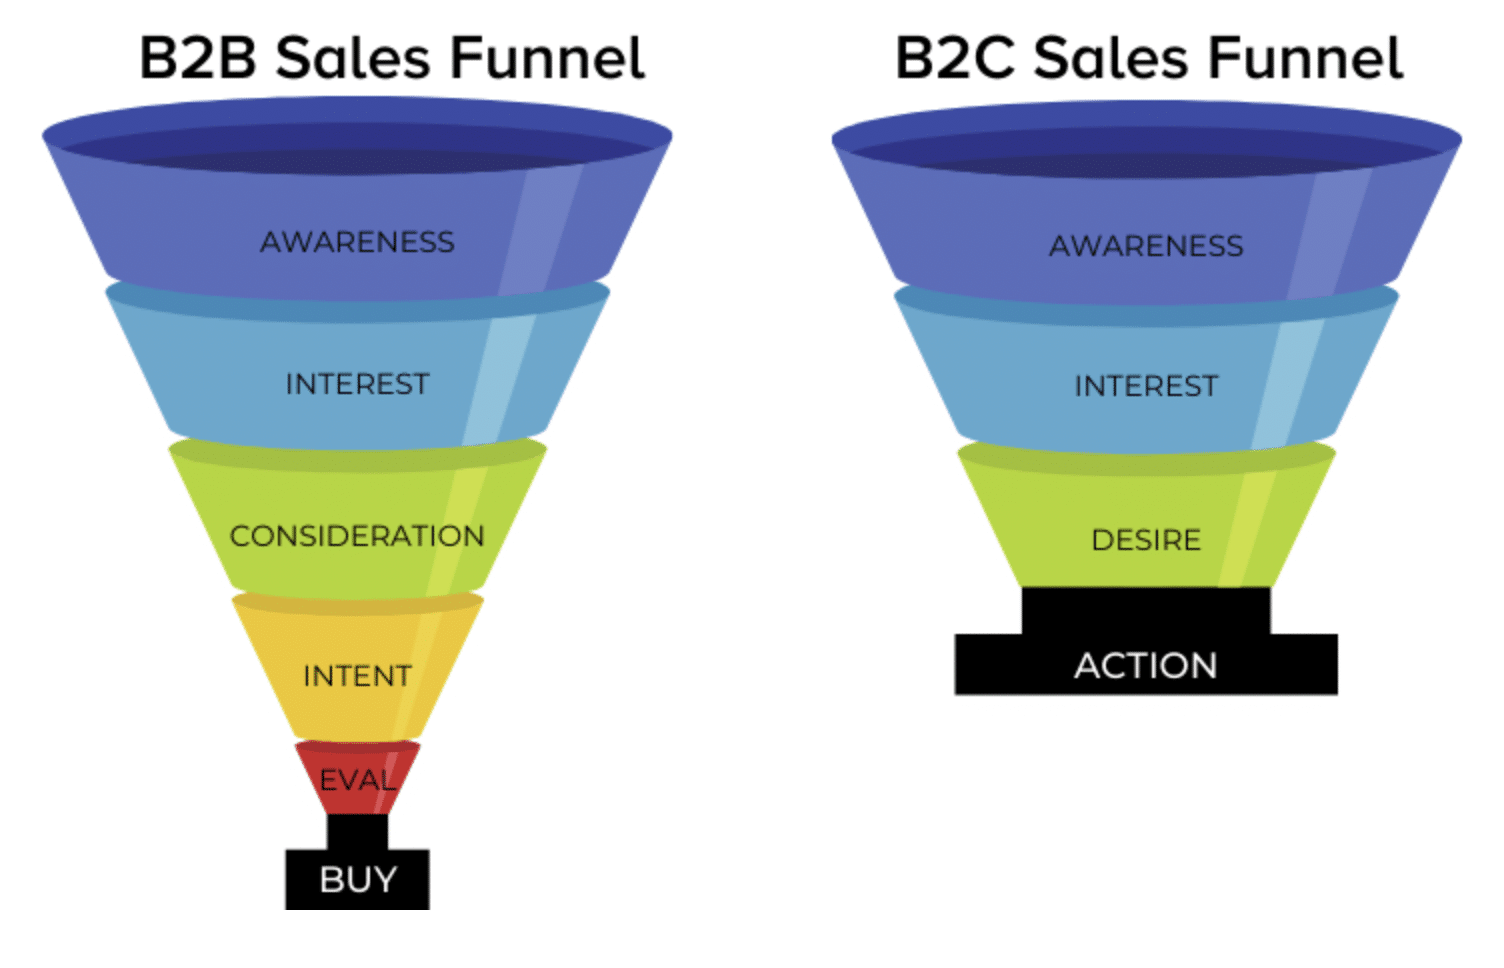 graphic shows the difference between B2B vs. B2C marketing sales funnels